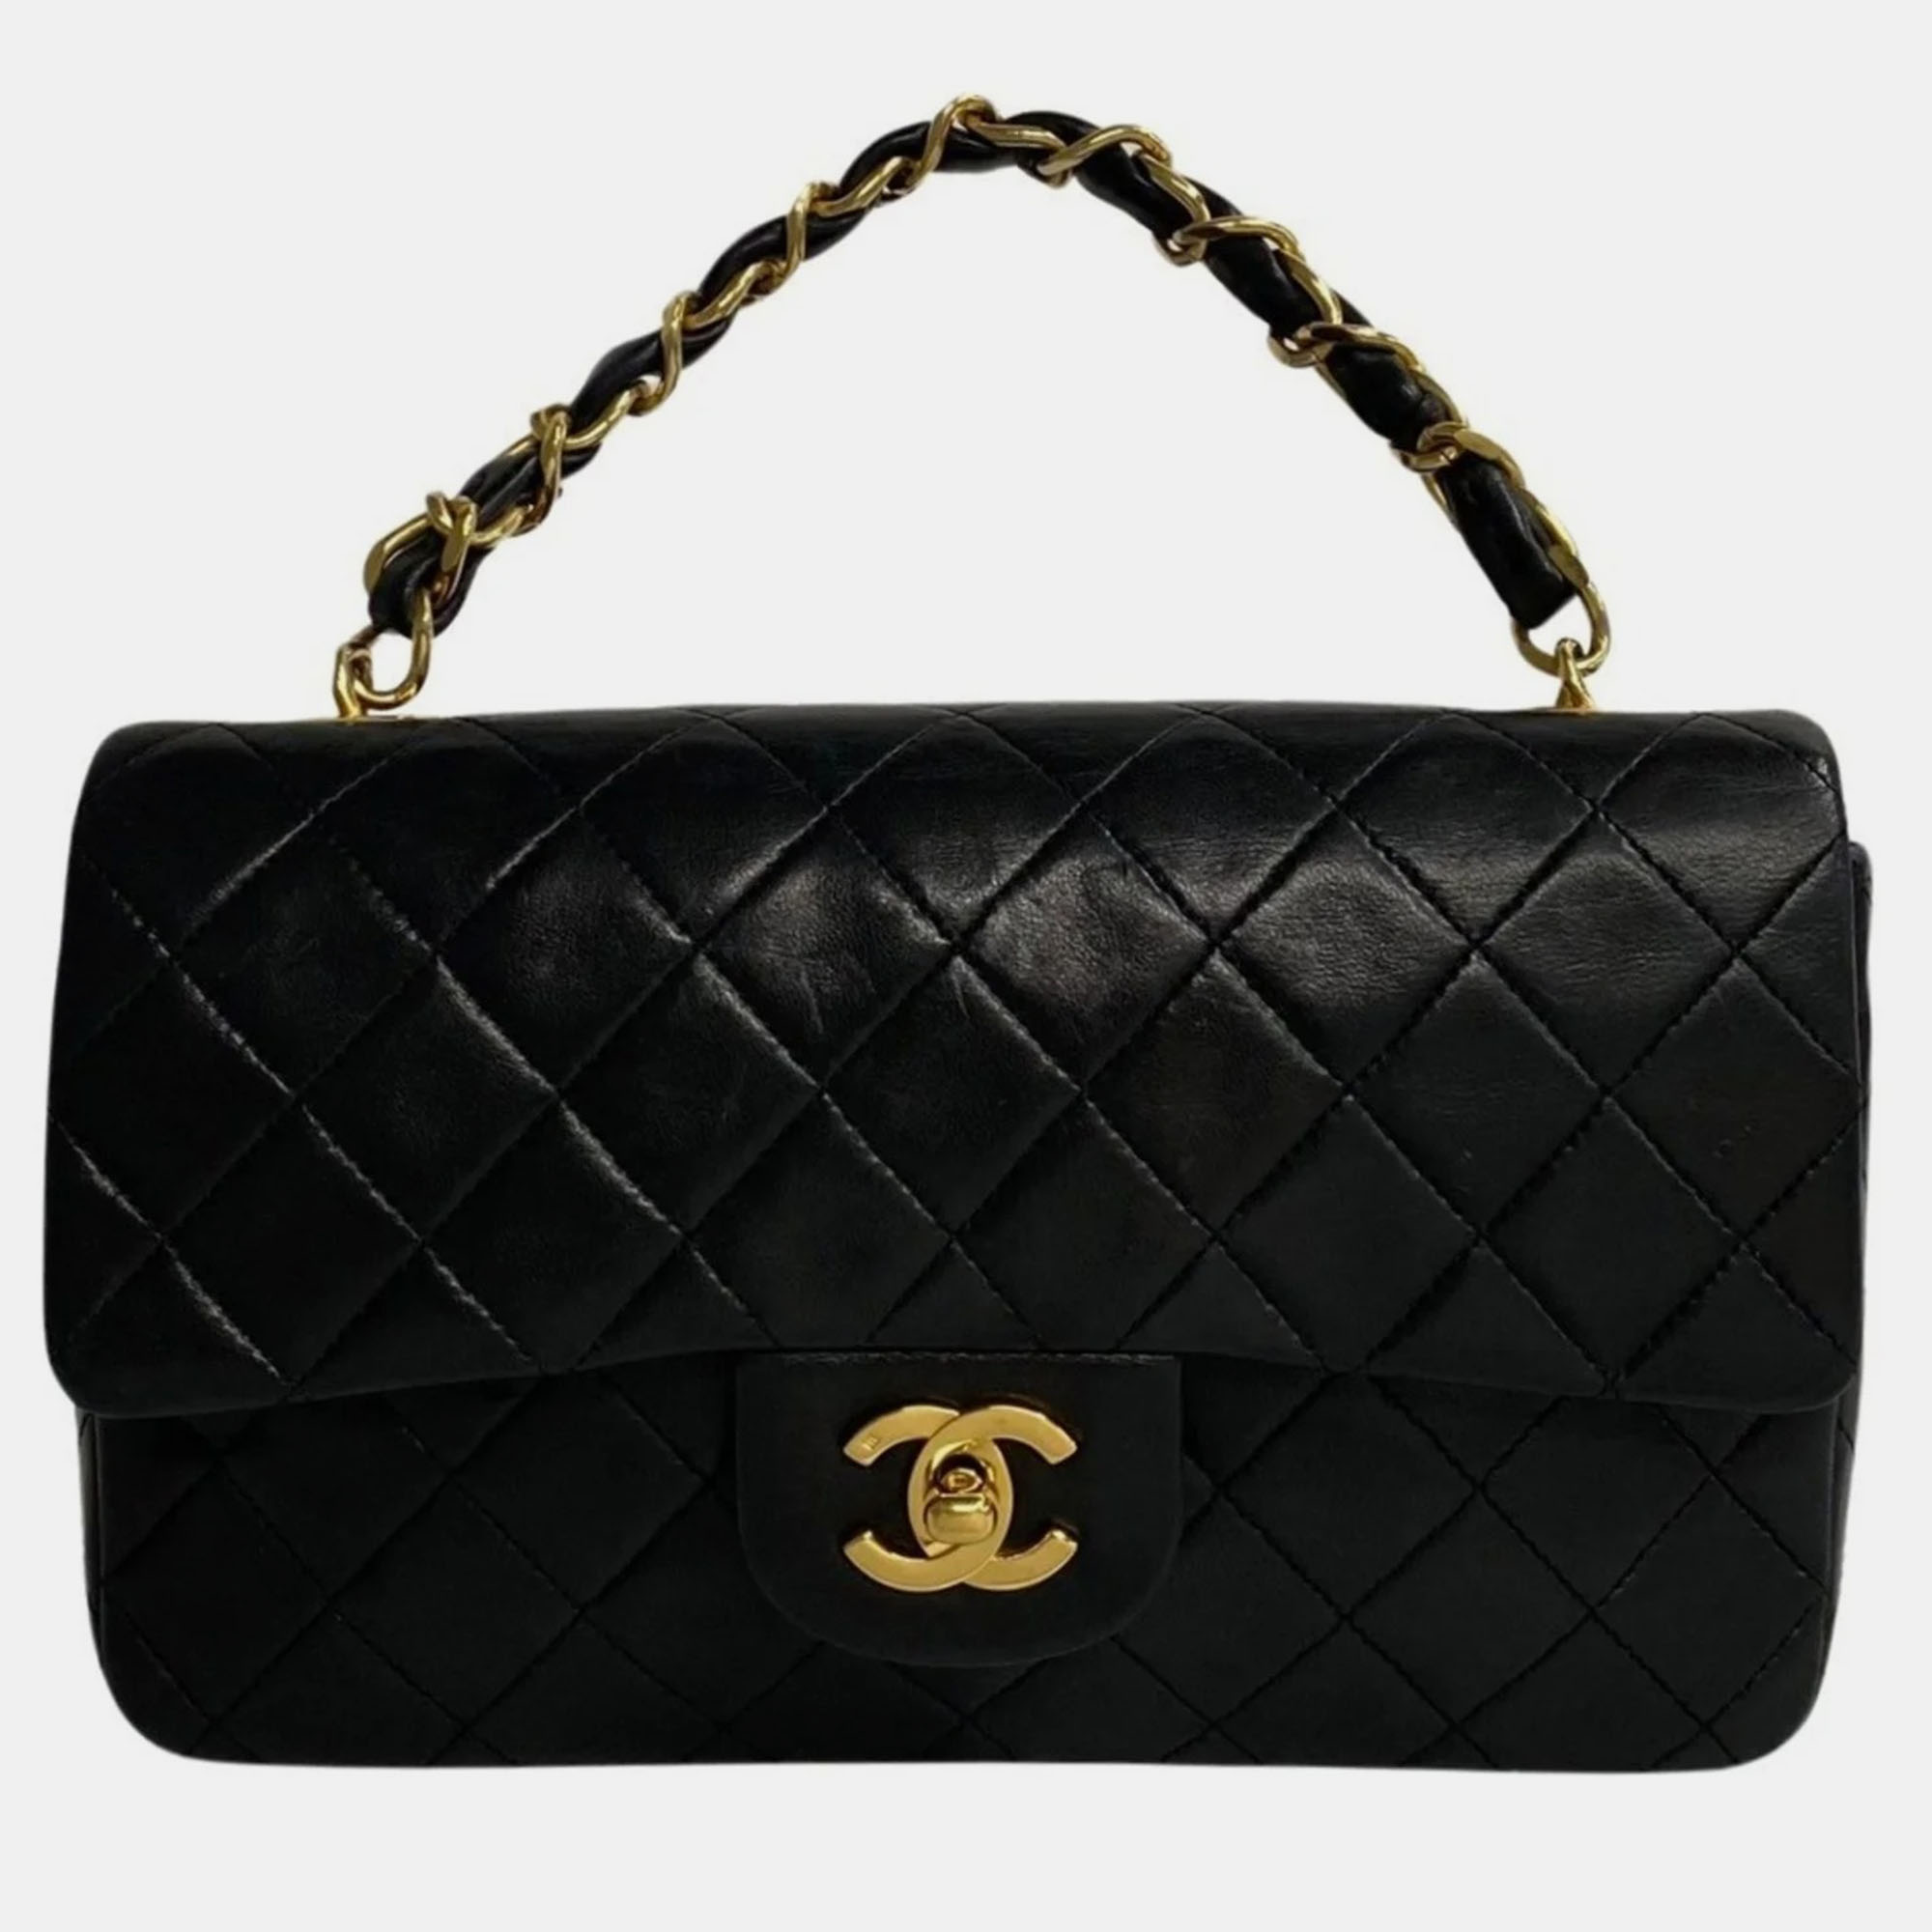 Indulge in timeless elegance with this Chanel shoulder bag meticulously crafted to perfection. Its exquisite details and luxurious materials make it a statement piece for any sophisticated ensemble.